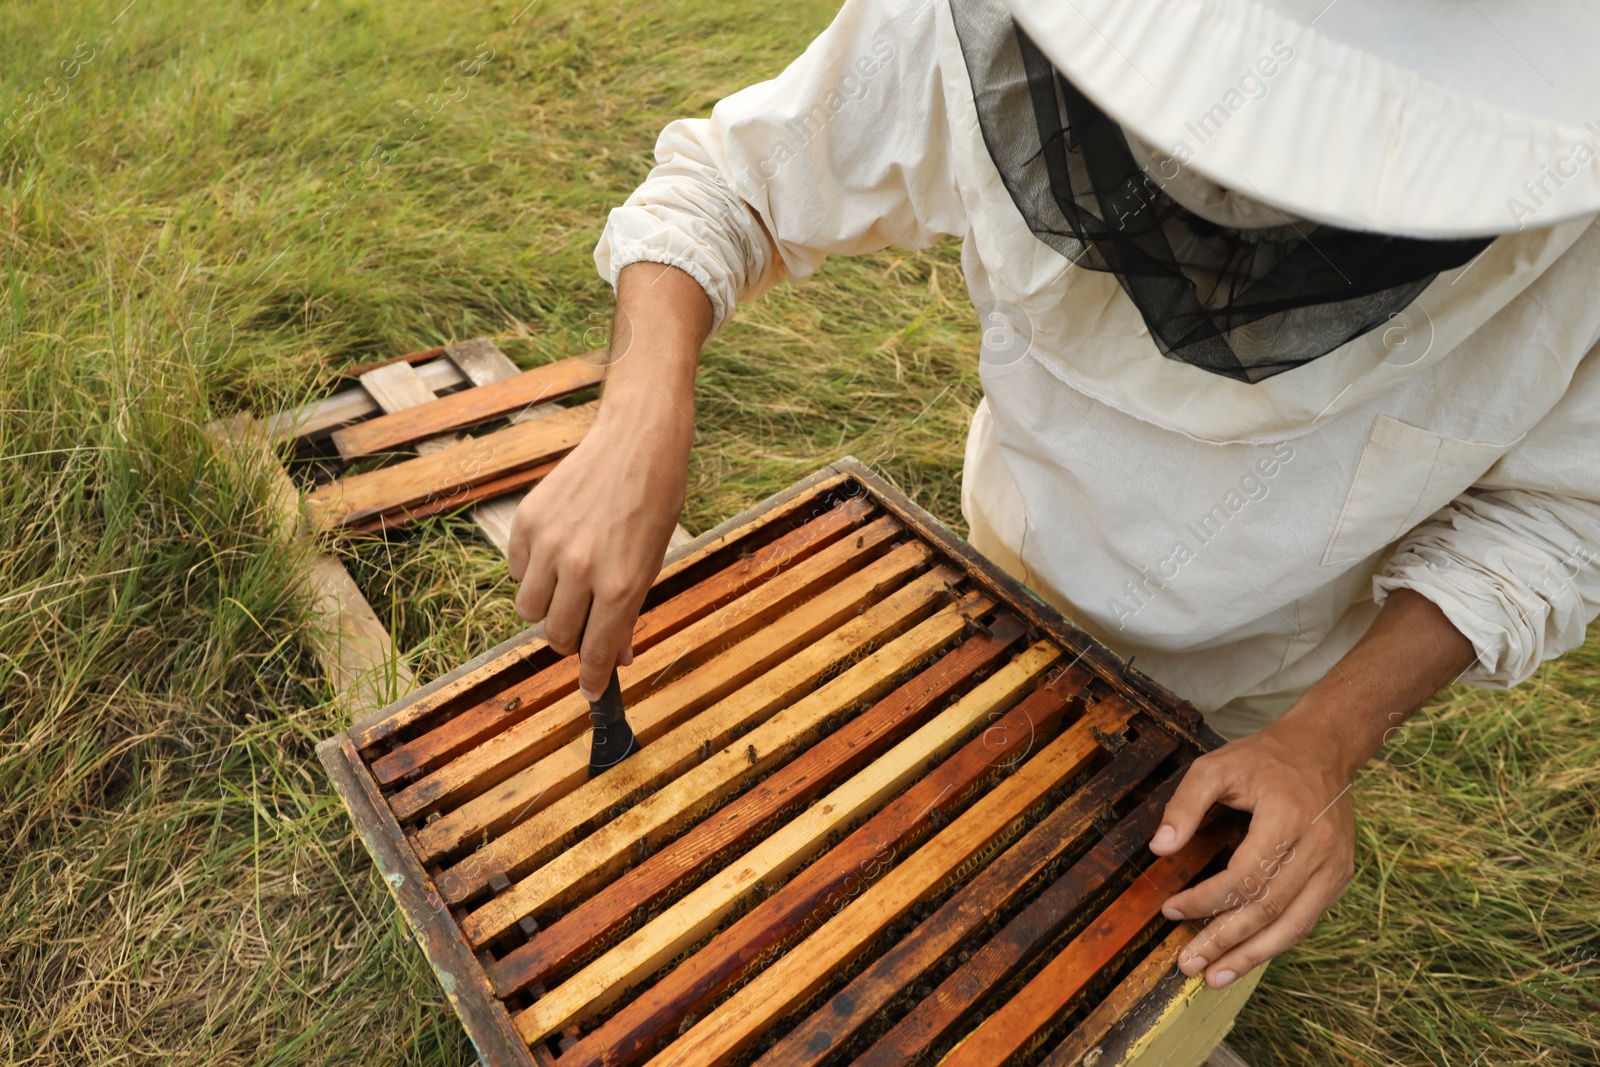 Photo of Beekeeper in uniform taking honey frame from hive at apiary